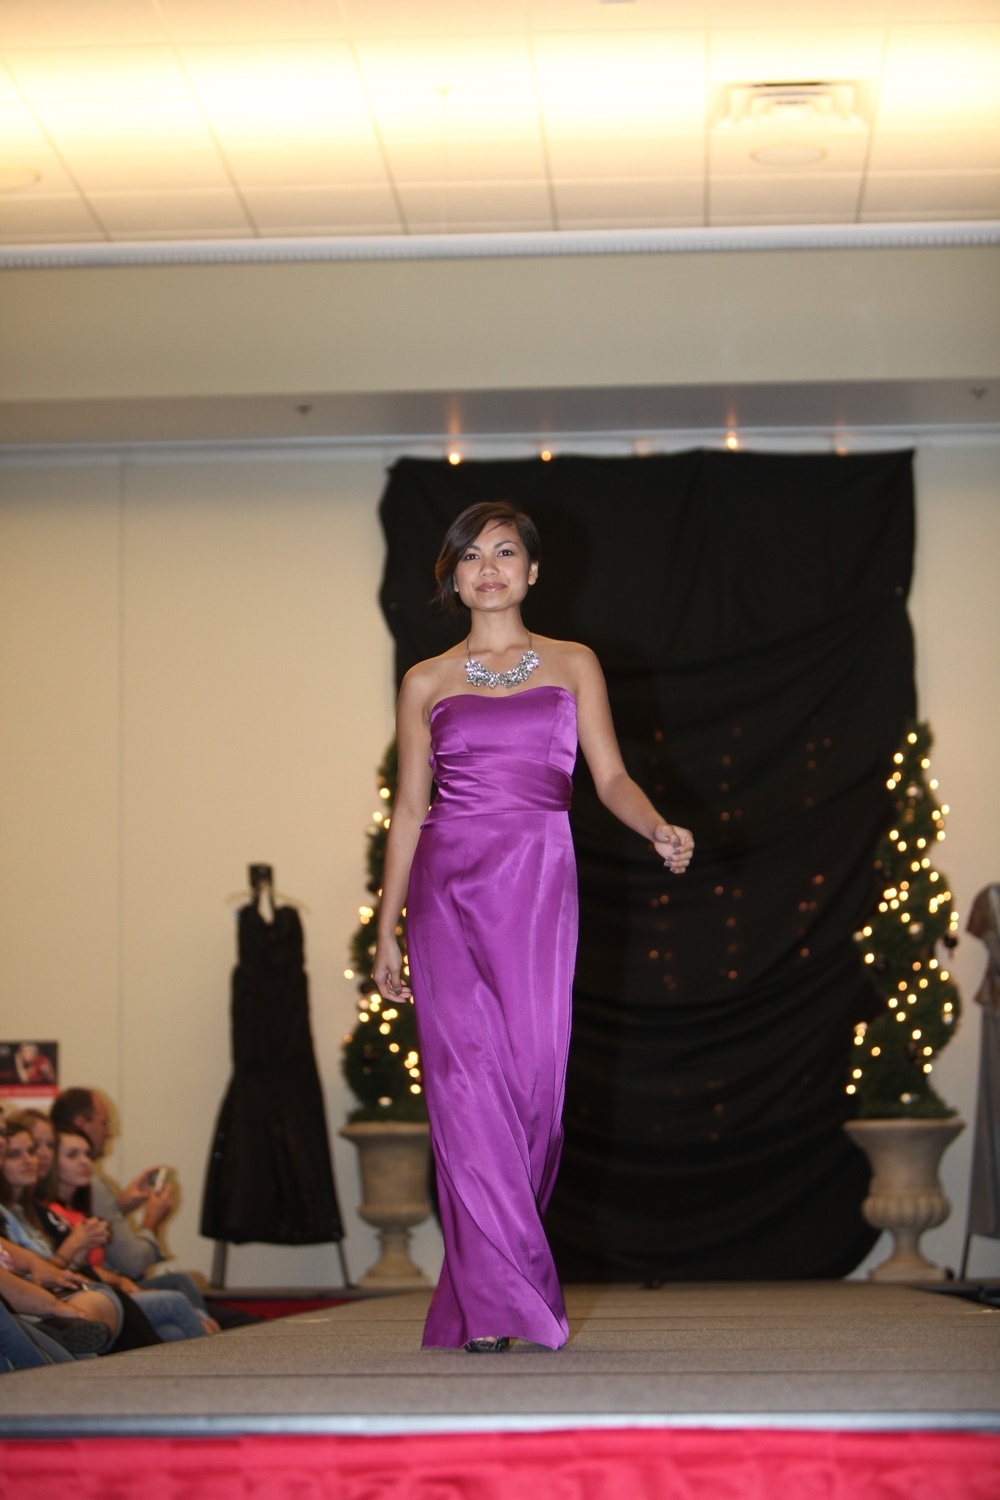 4th Annual Operation Ball Gown